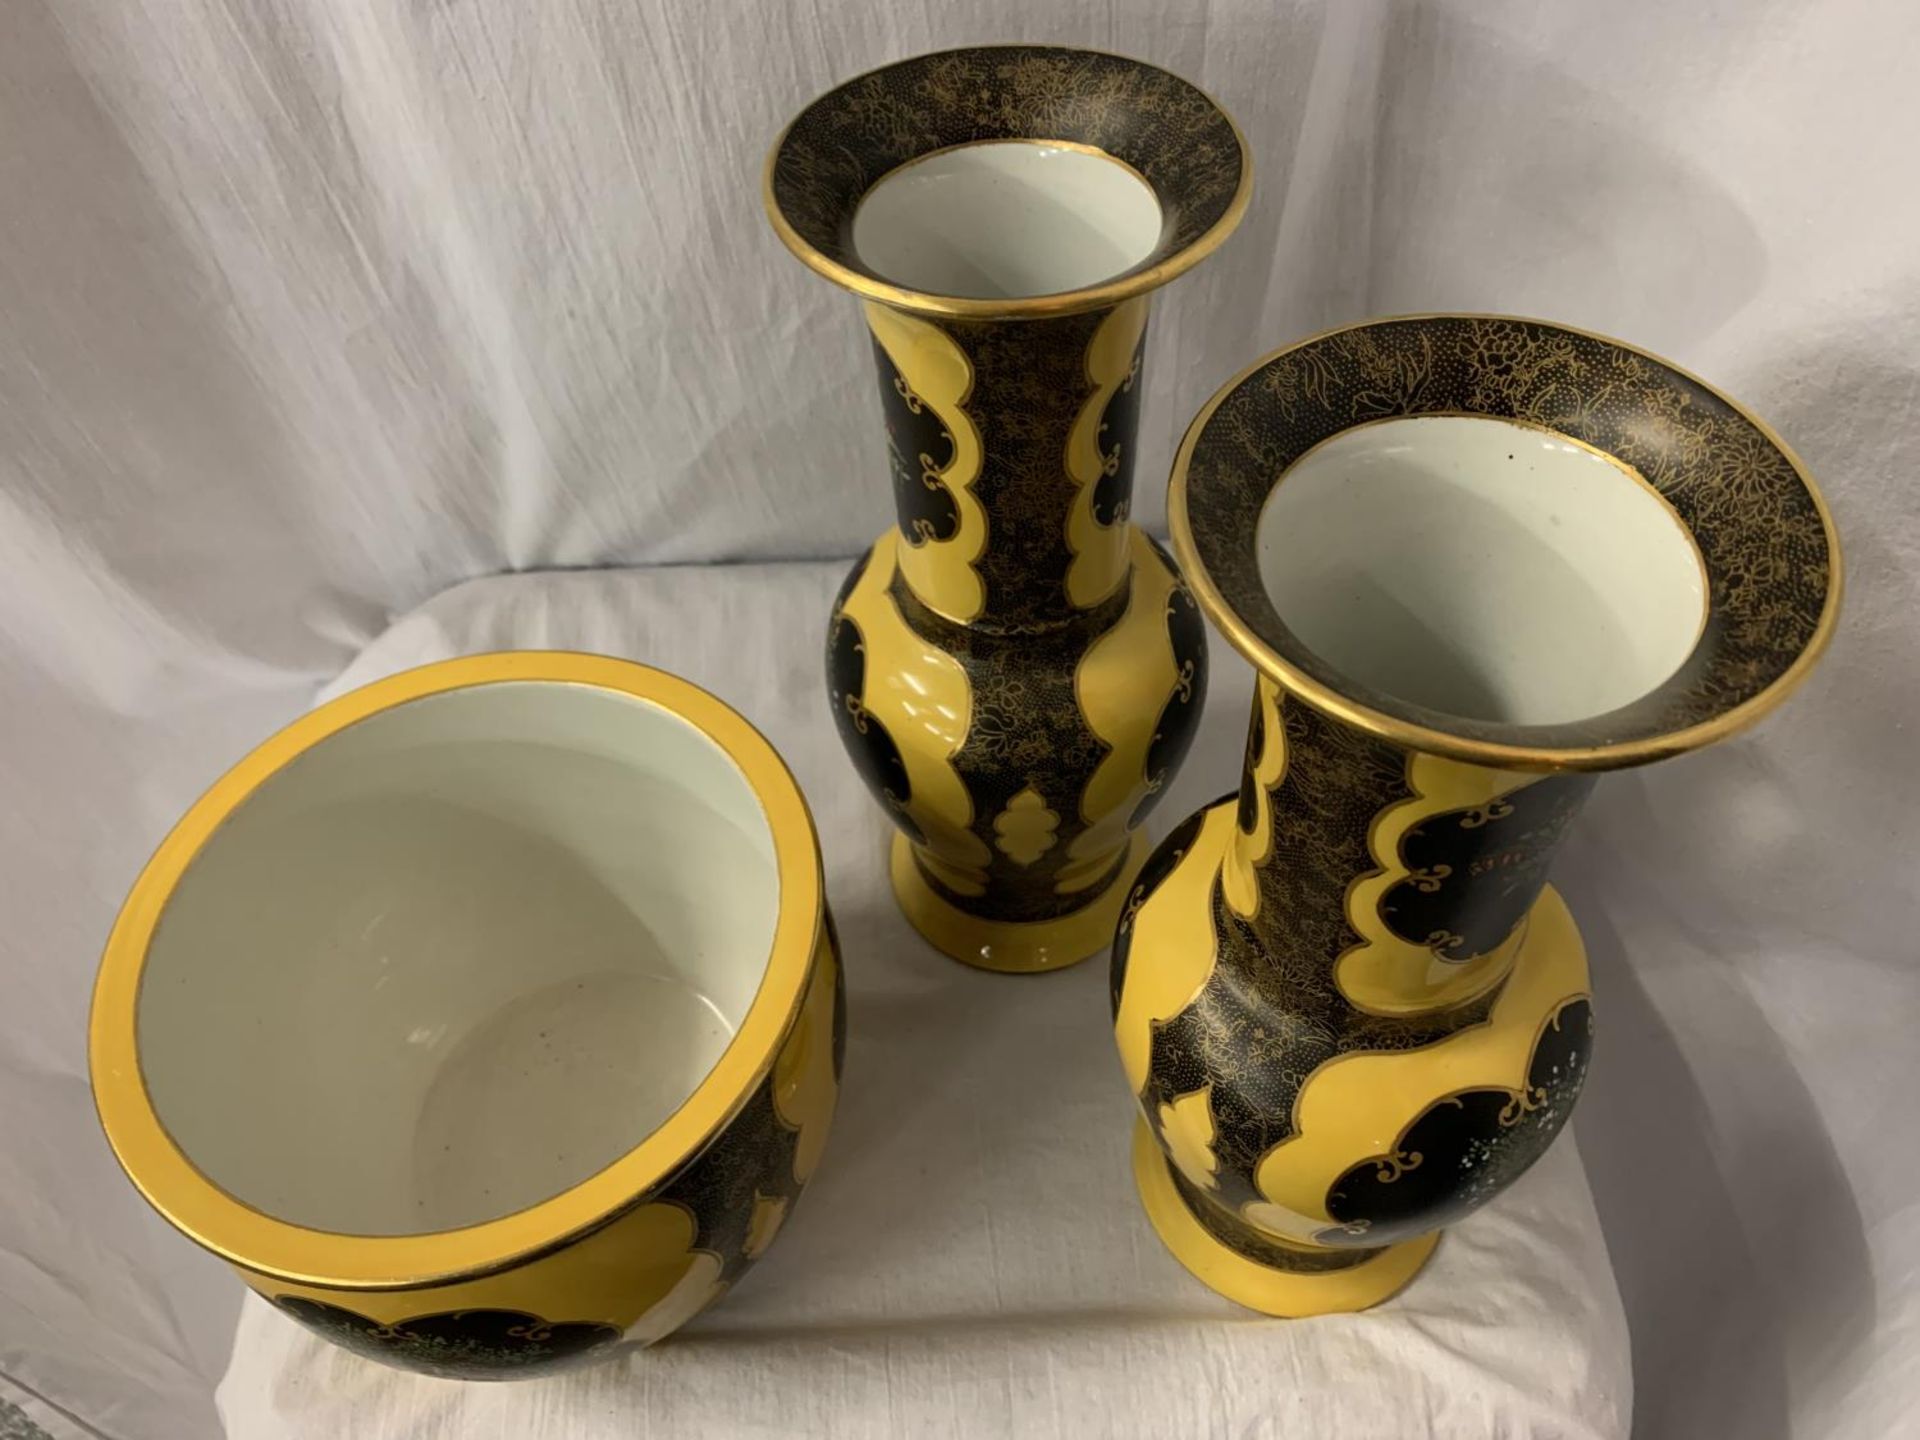 A GROUP OF DECORATIVE CARLTON WARE, A PLANTER AND A PAIR OF VASES H: 32.5CM - Image 2 of 4